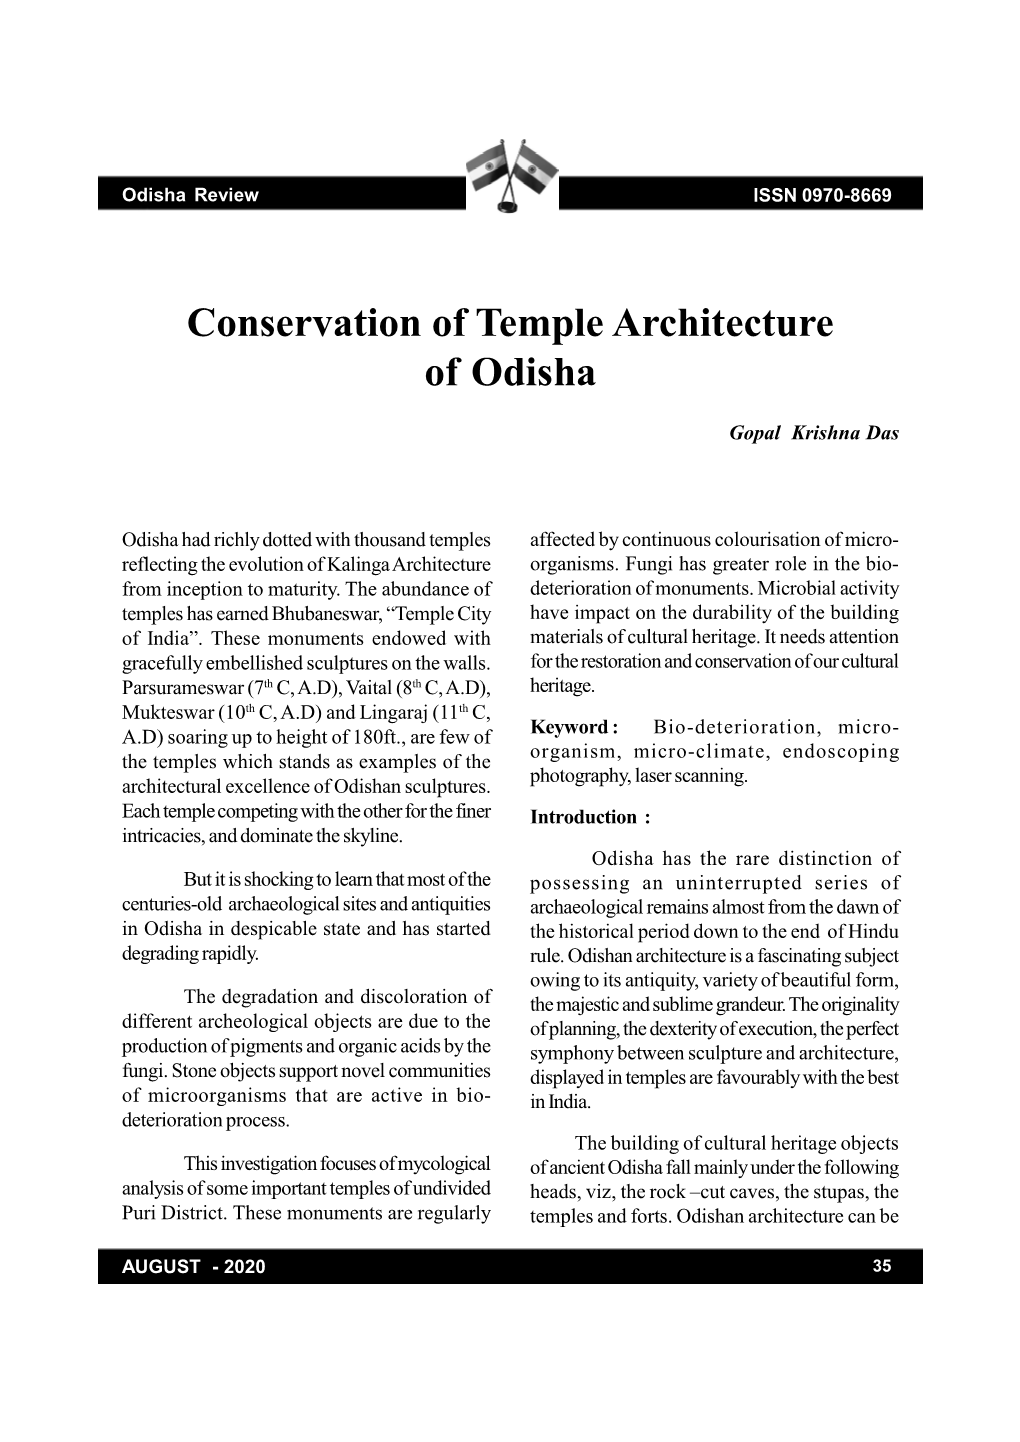 Conservation of Temple Architecture of Odisha